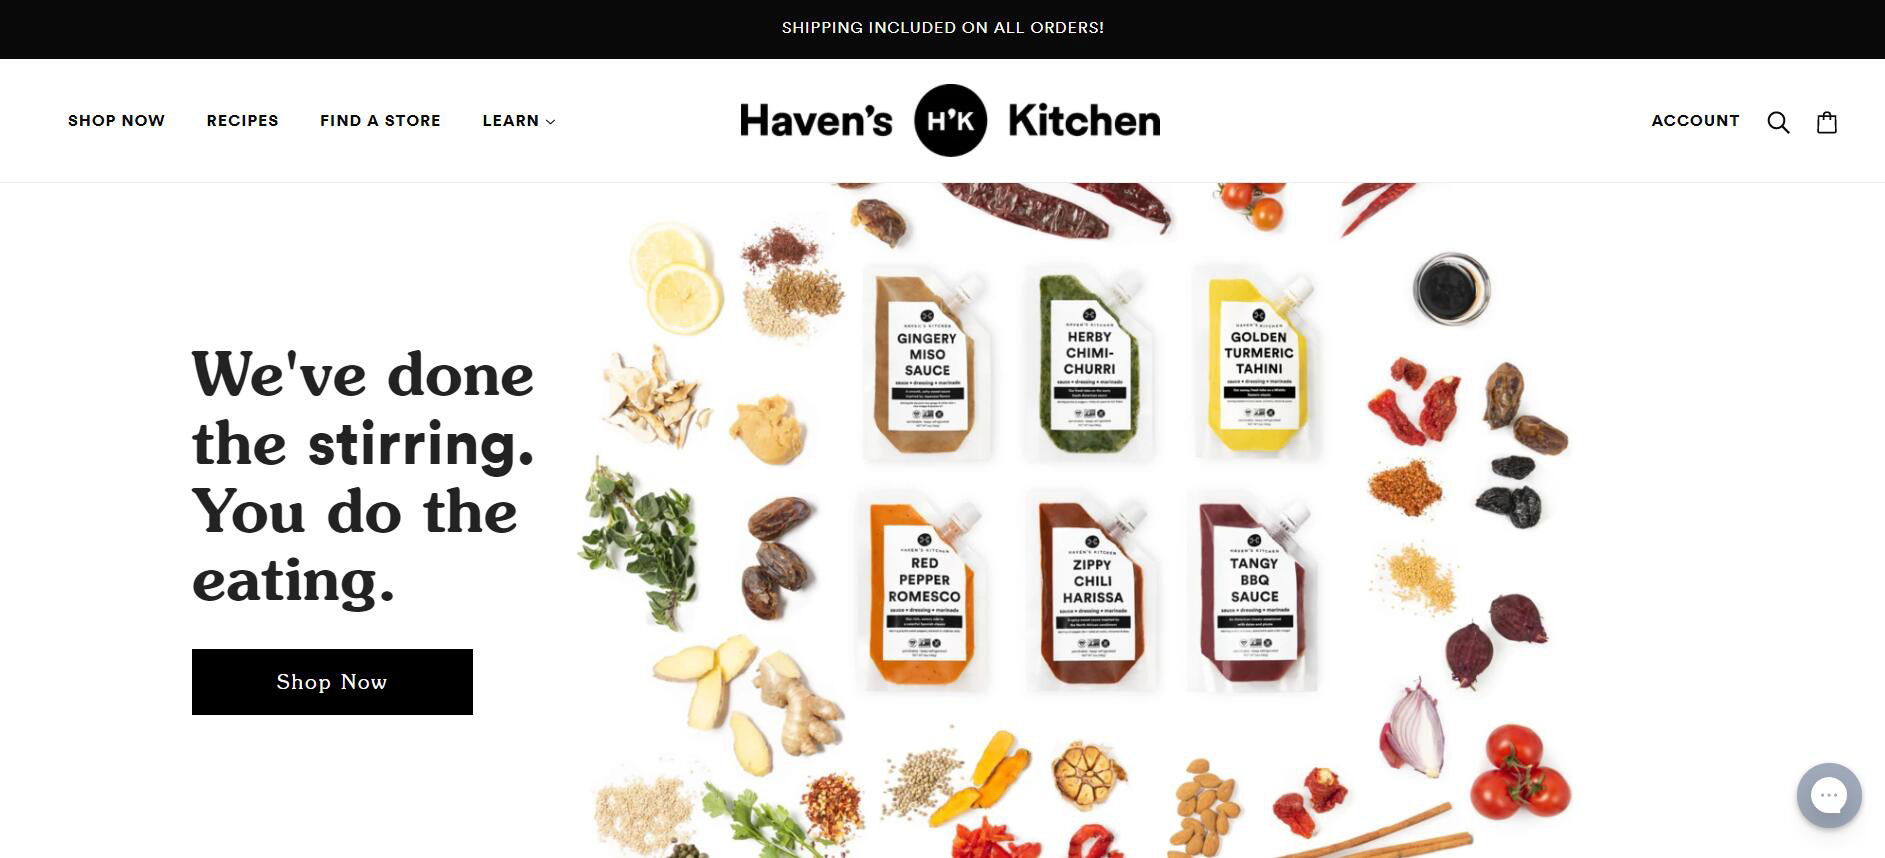 Haven's Kitchen: Promoting Home Cooking with Purpose